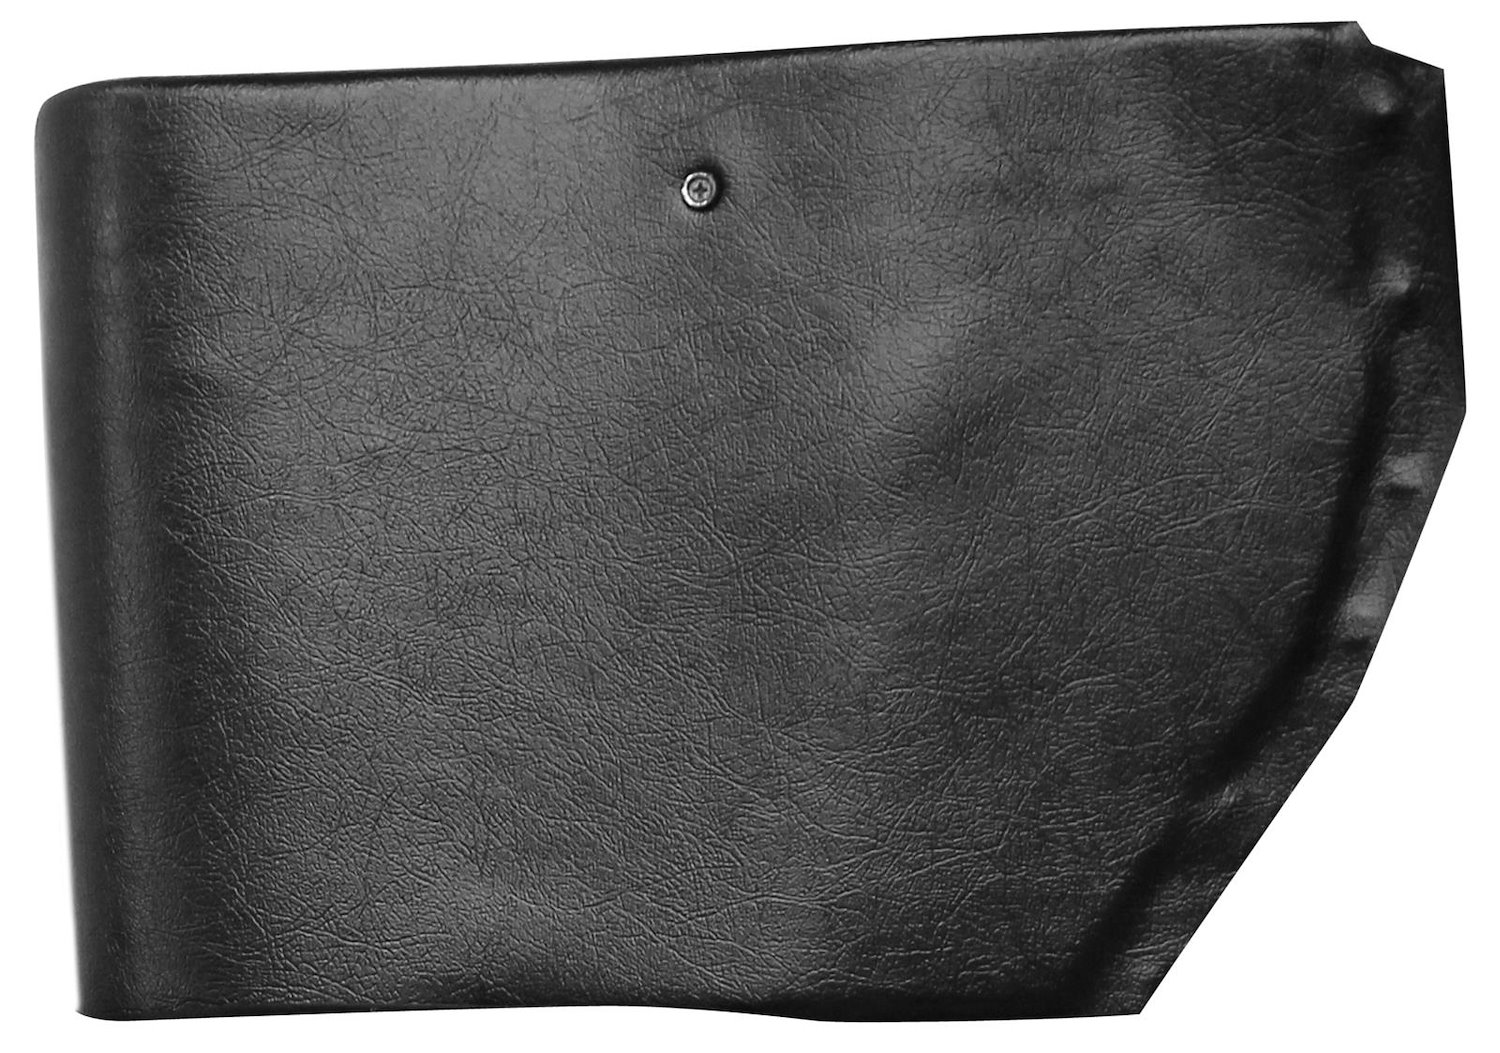 1964 Chevrolet Impala and Super Sport Convertible Interior Rear Armrest Panel Convertible Piston Panel Cover Panel Upholstery Se